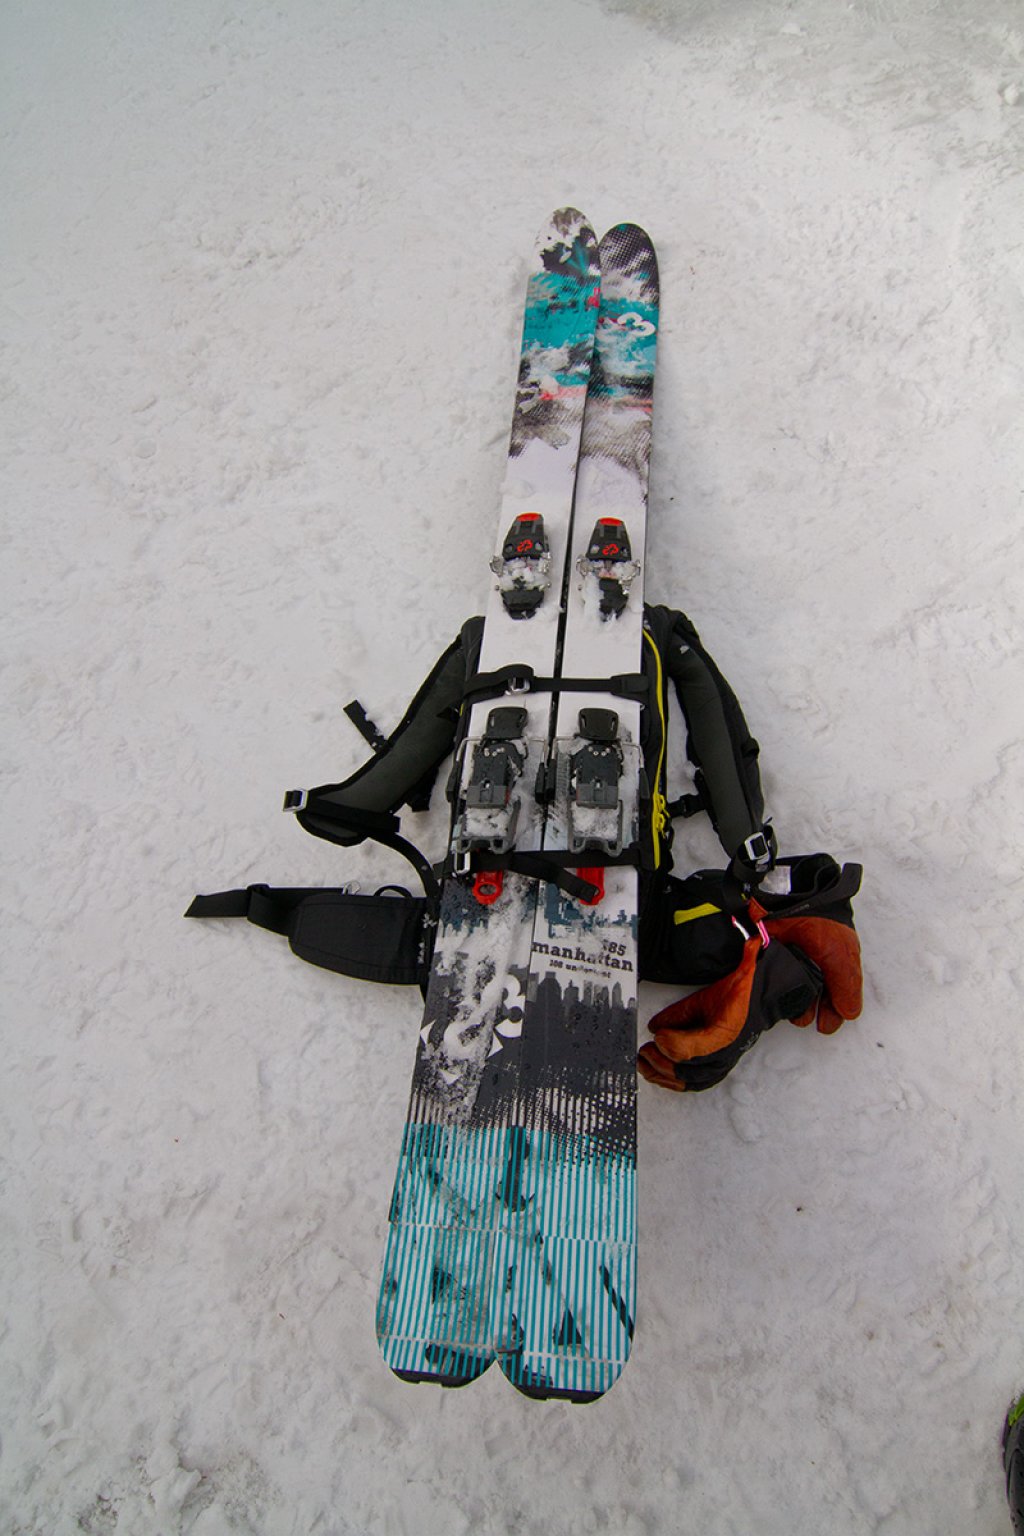 The snowboard holder is also suitable for carrying skis flat in front of the backpack. Sturdy metal eyelets ensure that nothing wobbles and reinforcements protect the straps from the steel edges